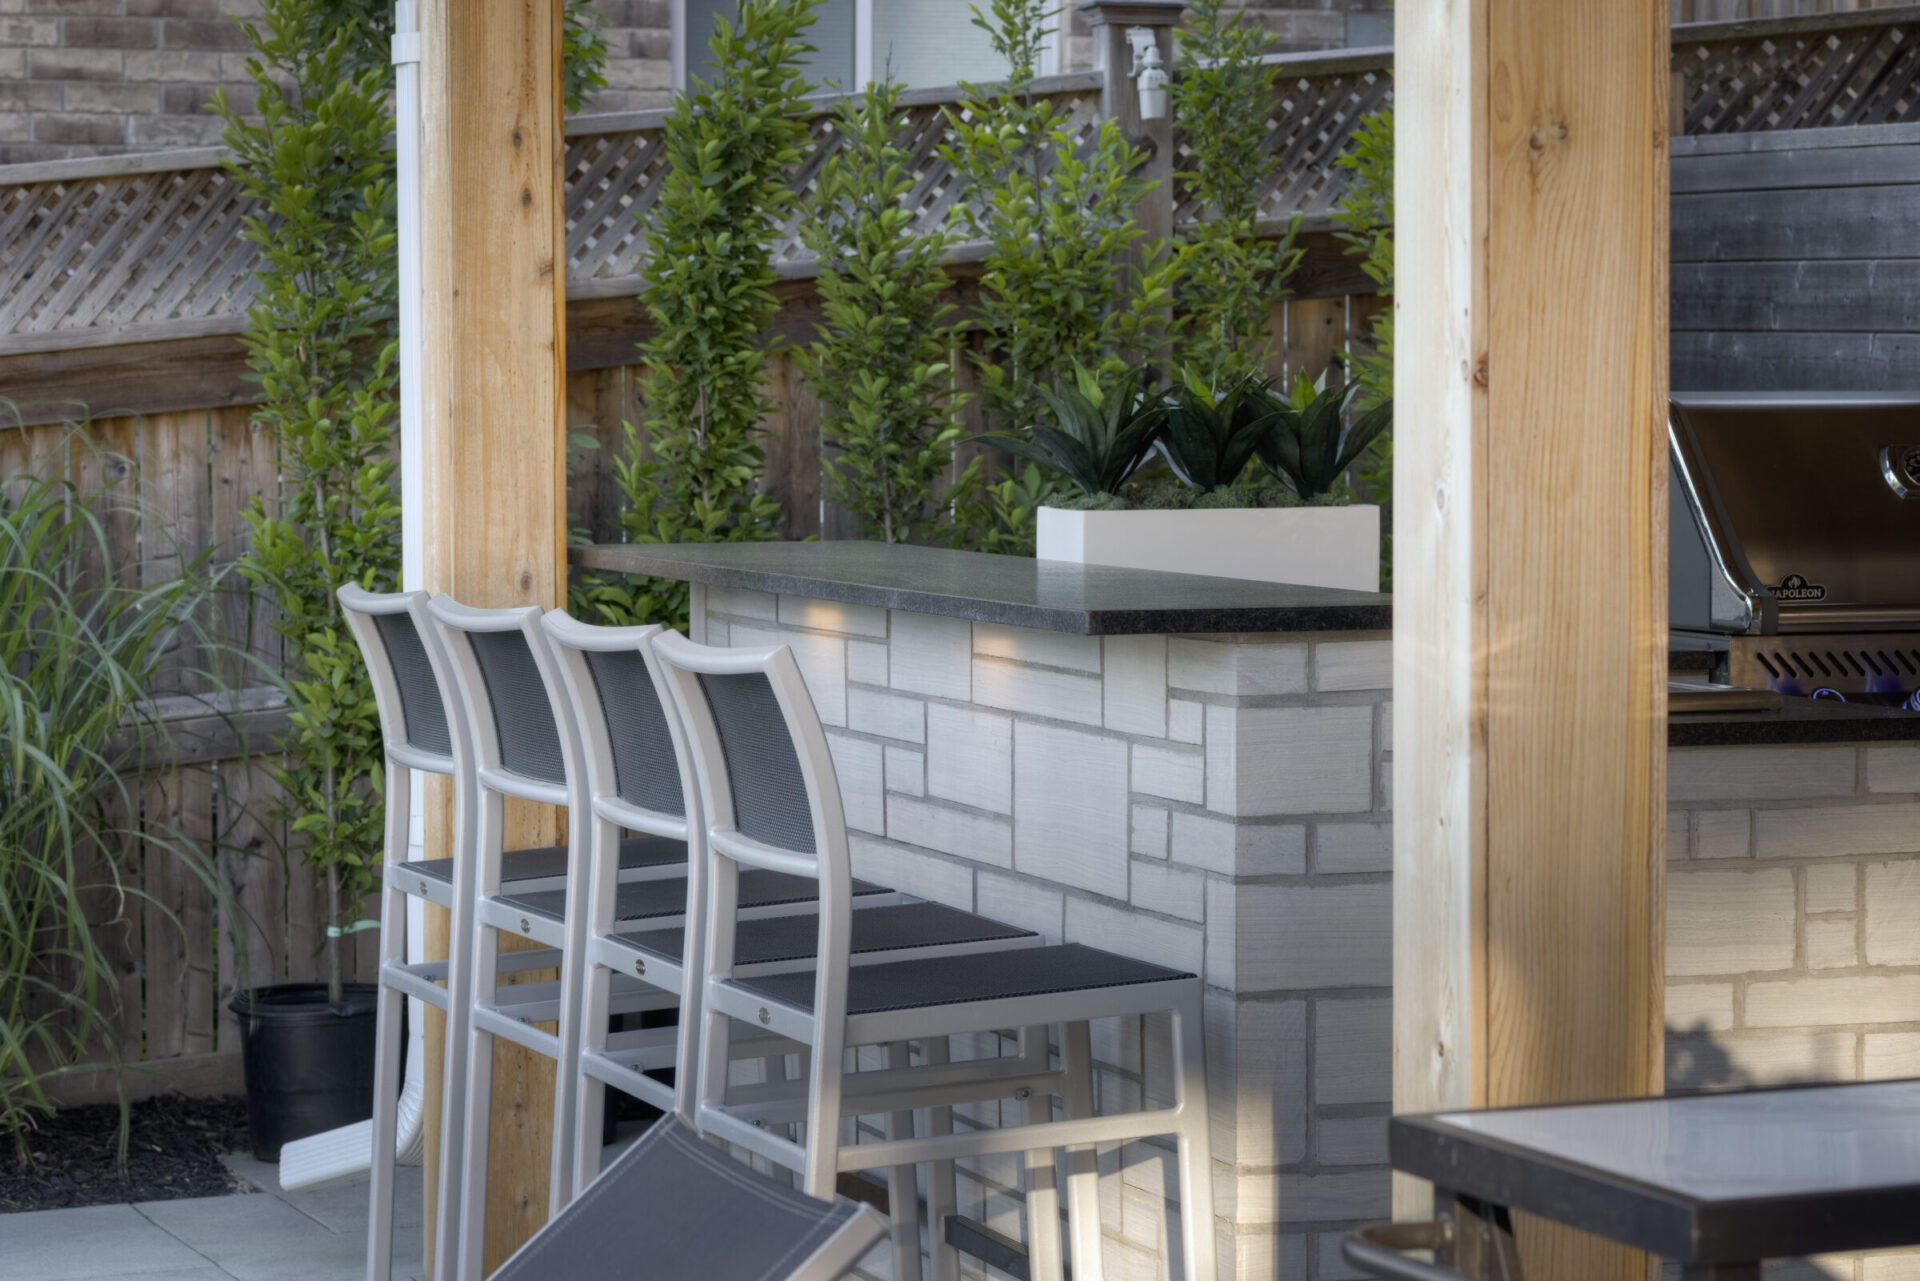 An outdoor patio area with modern bar stools, a built-in grill, wooden accents, greenery, and a privacy fence in a residential backyard setting.